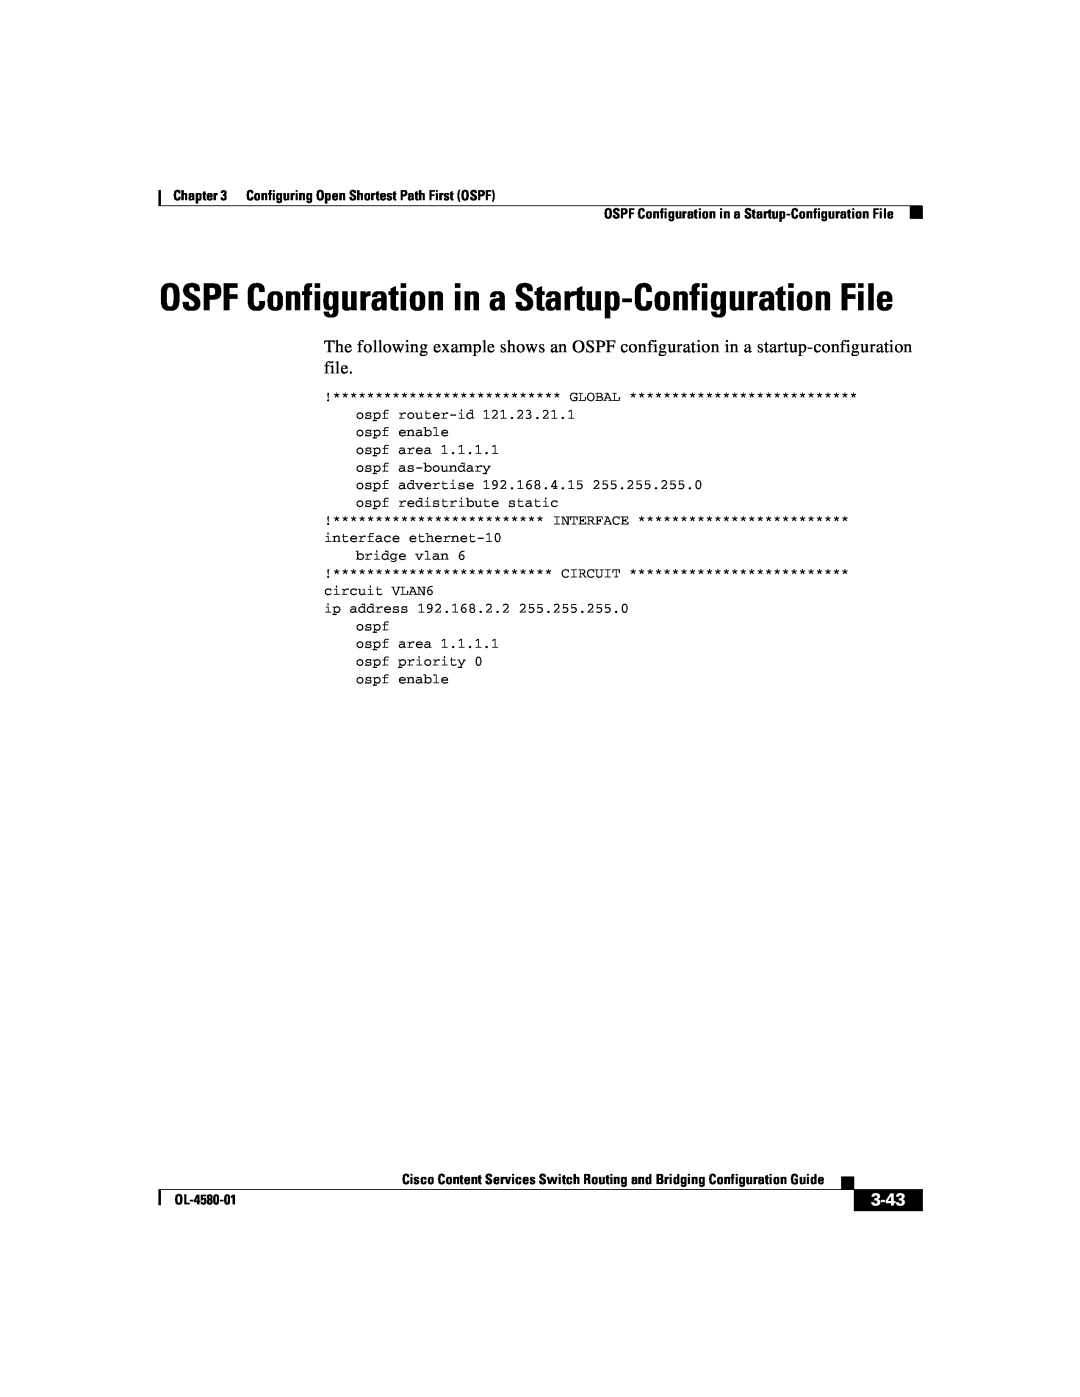 Cisco Systems OL-4580-01 manual OSPF Configuration in a Startup-Configuration File, 3-43, Interface 